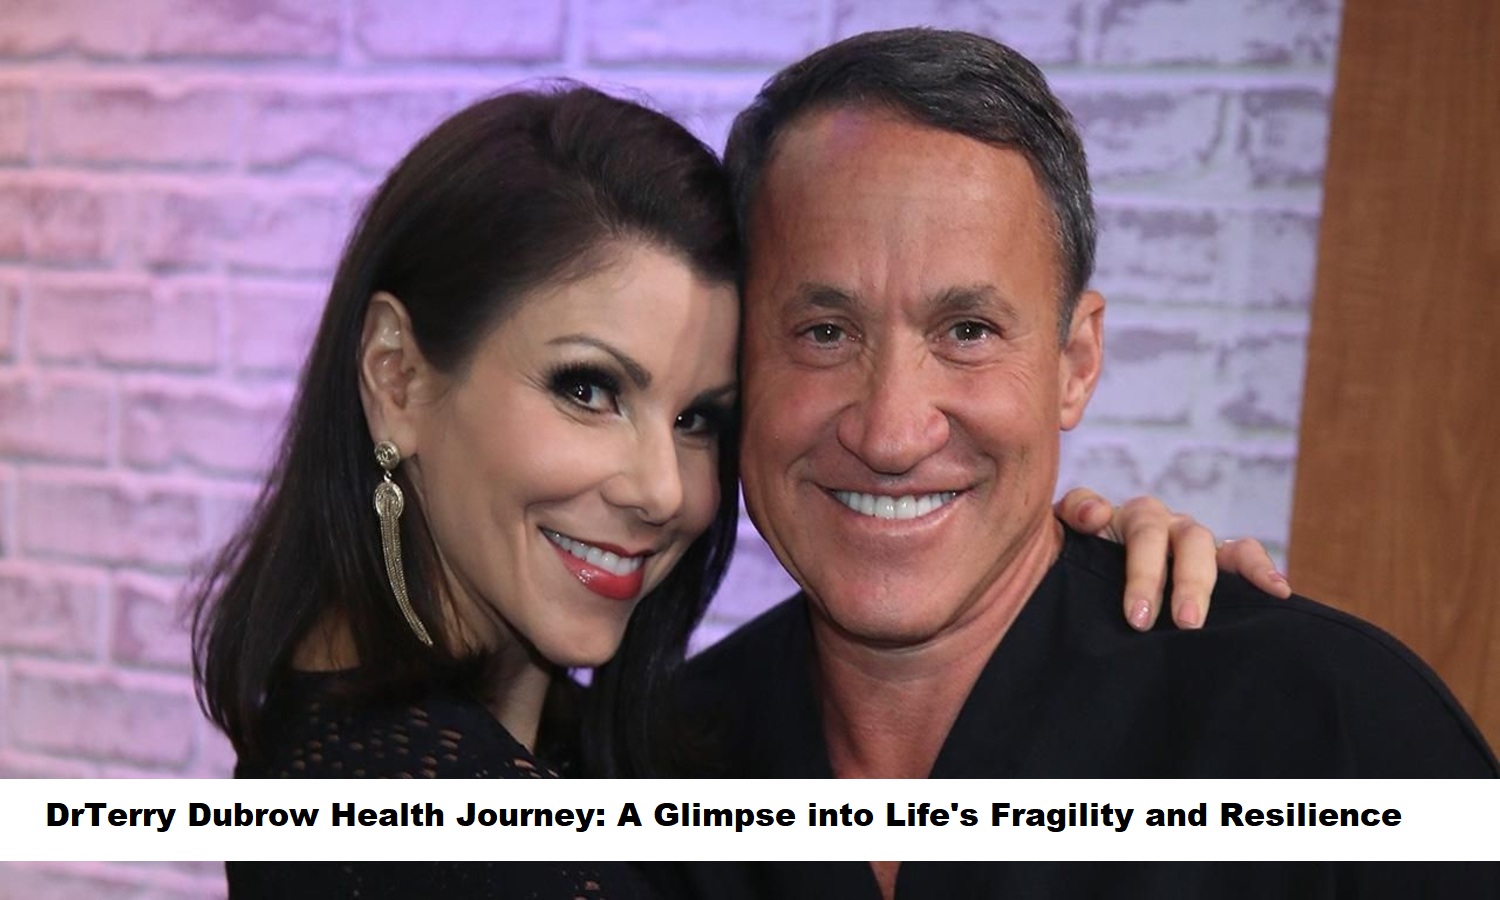 DrTerry Dubrow Health Journey A Glimpse into Life's Fragility and Resilience